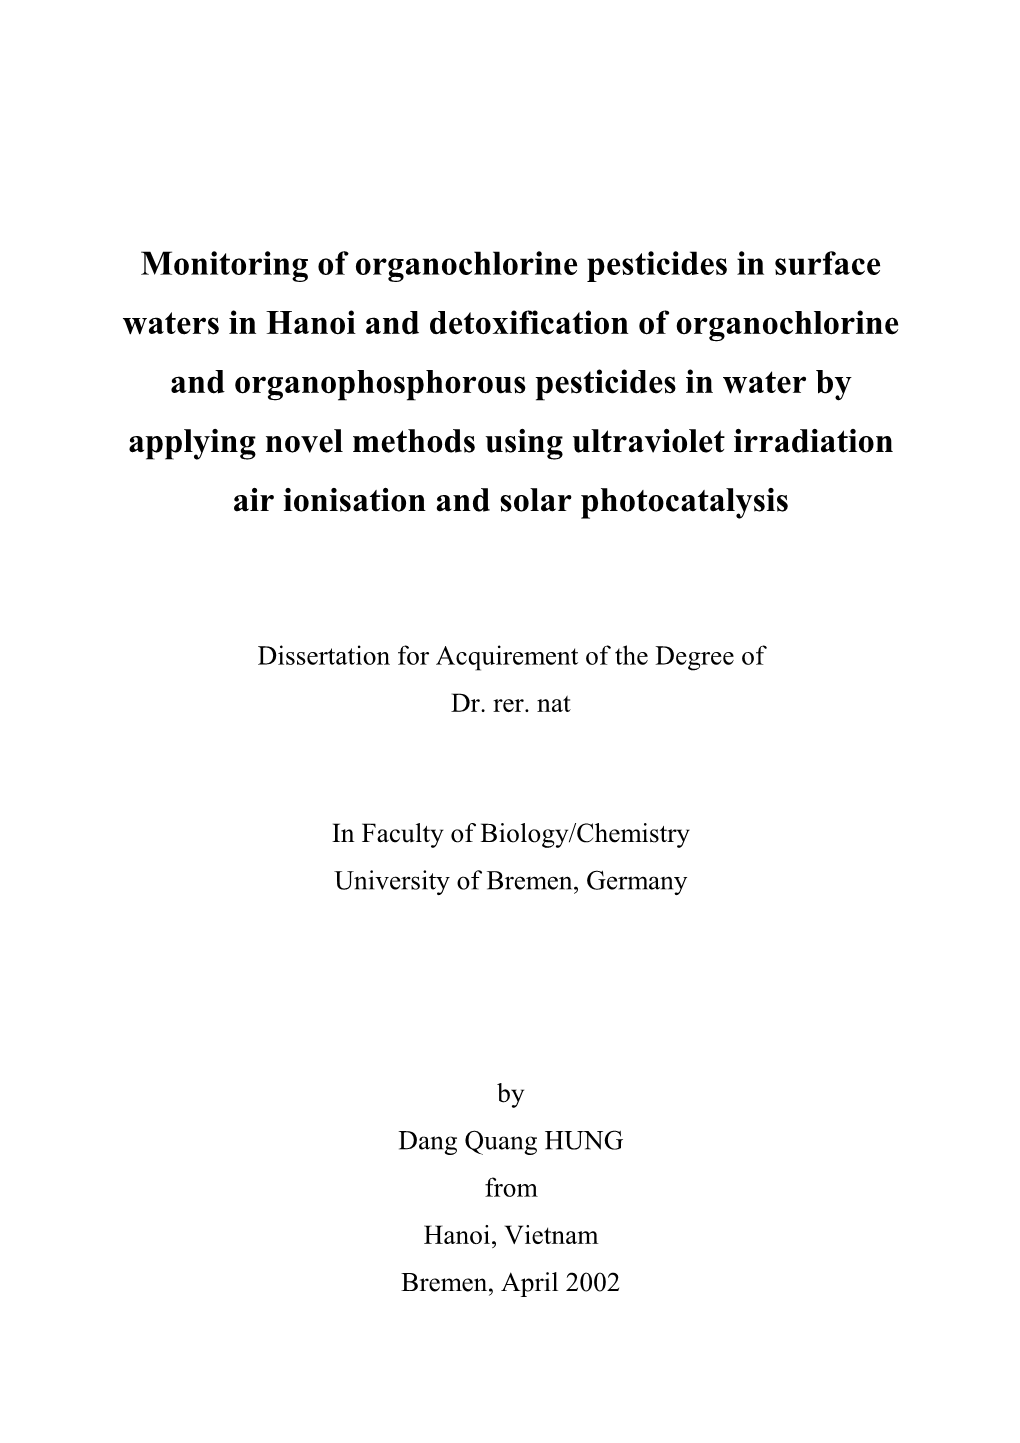 Monitoring of Organochlorine Pesticides in Surface Waters In